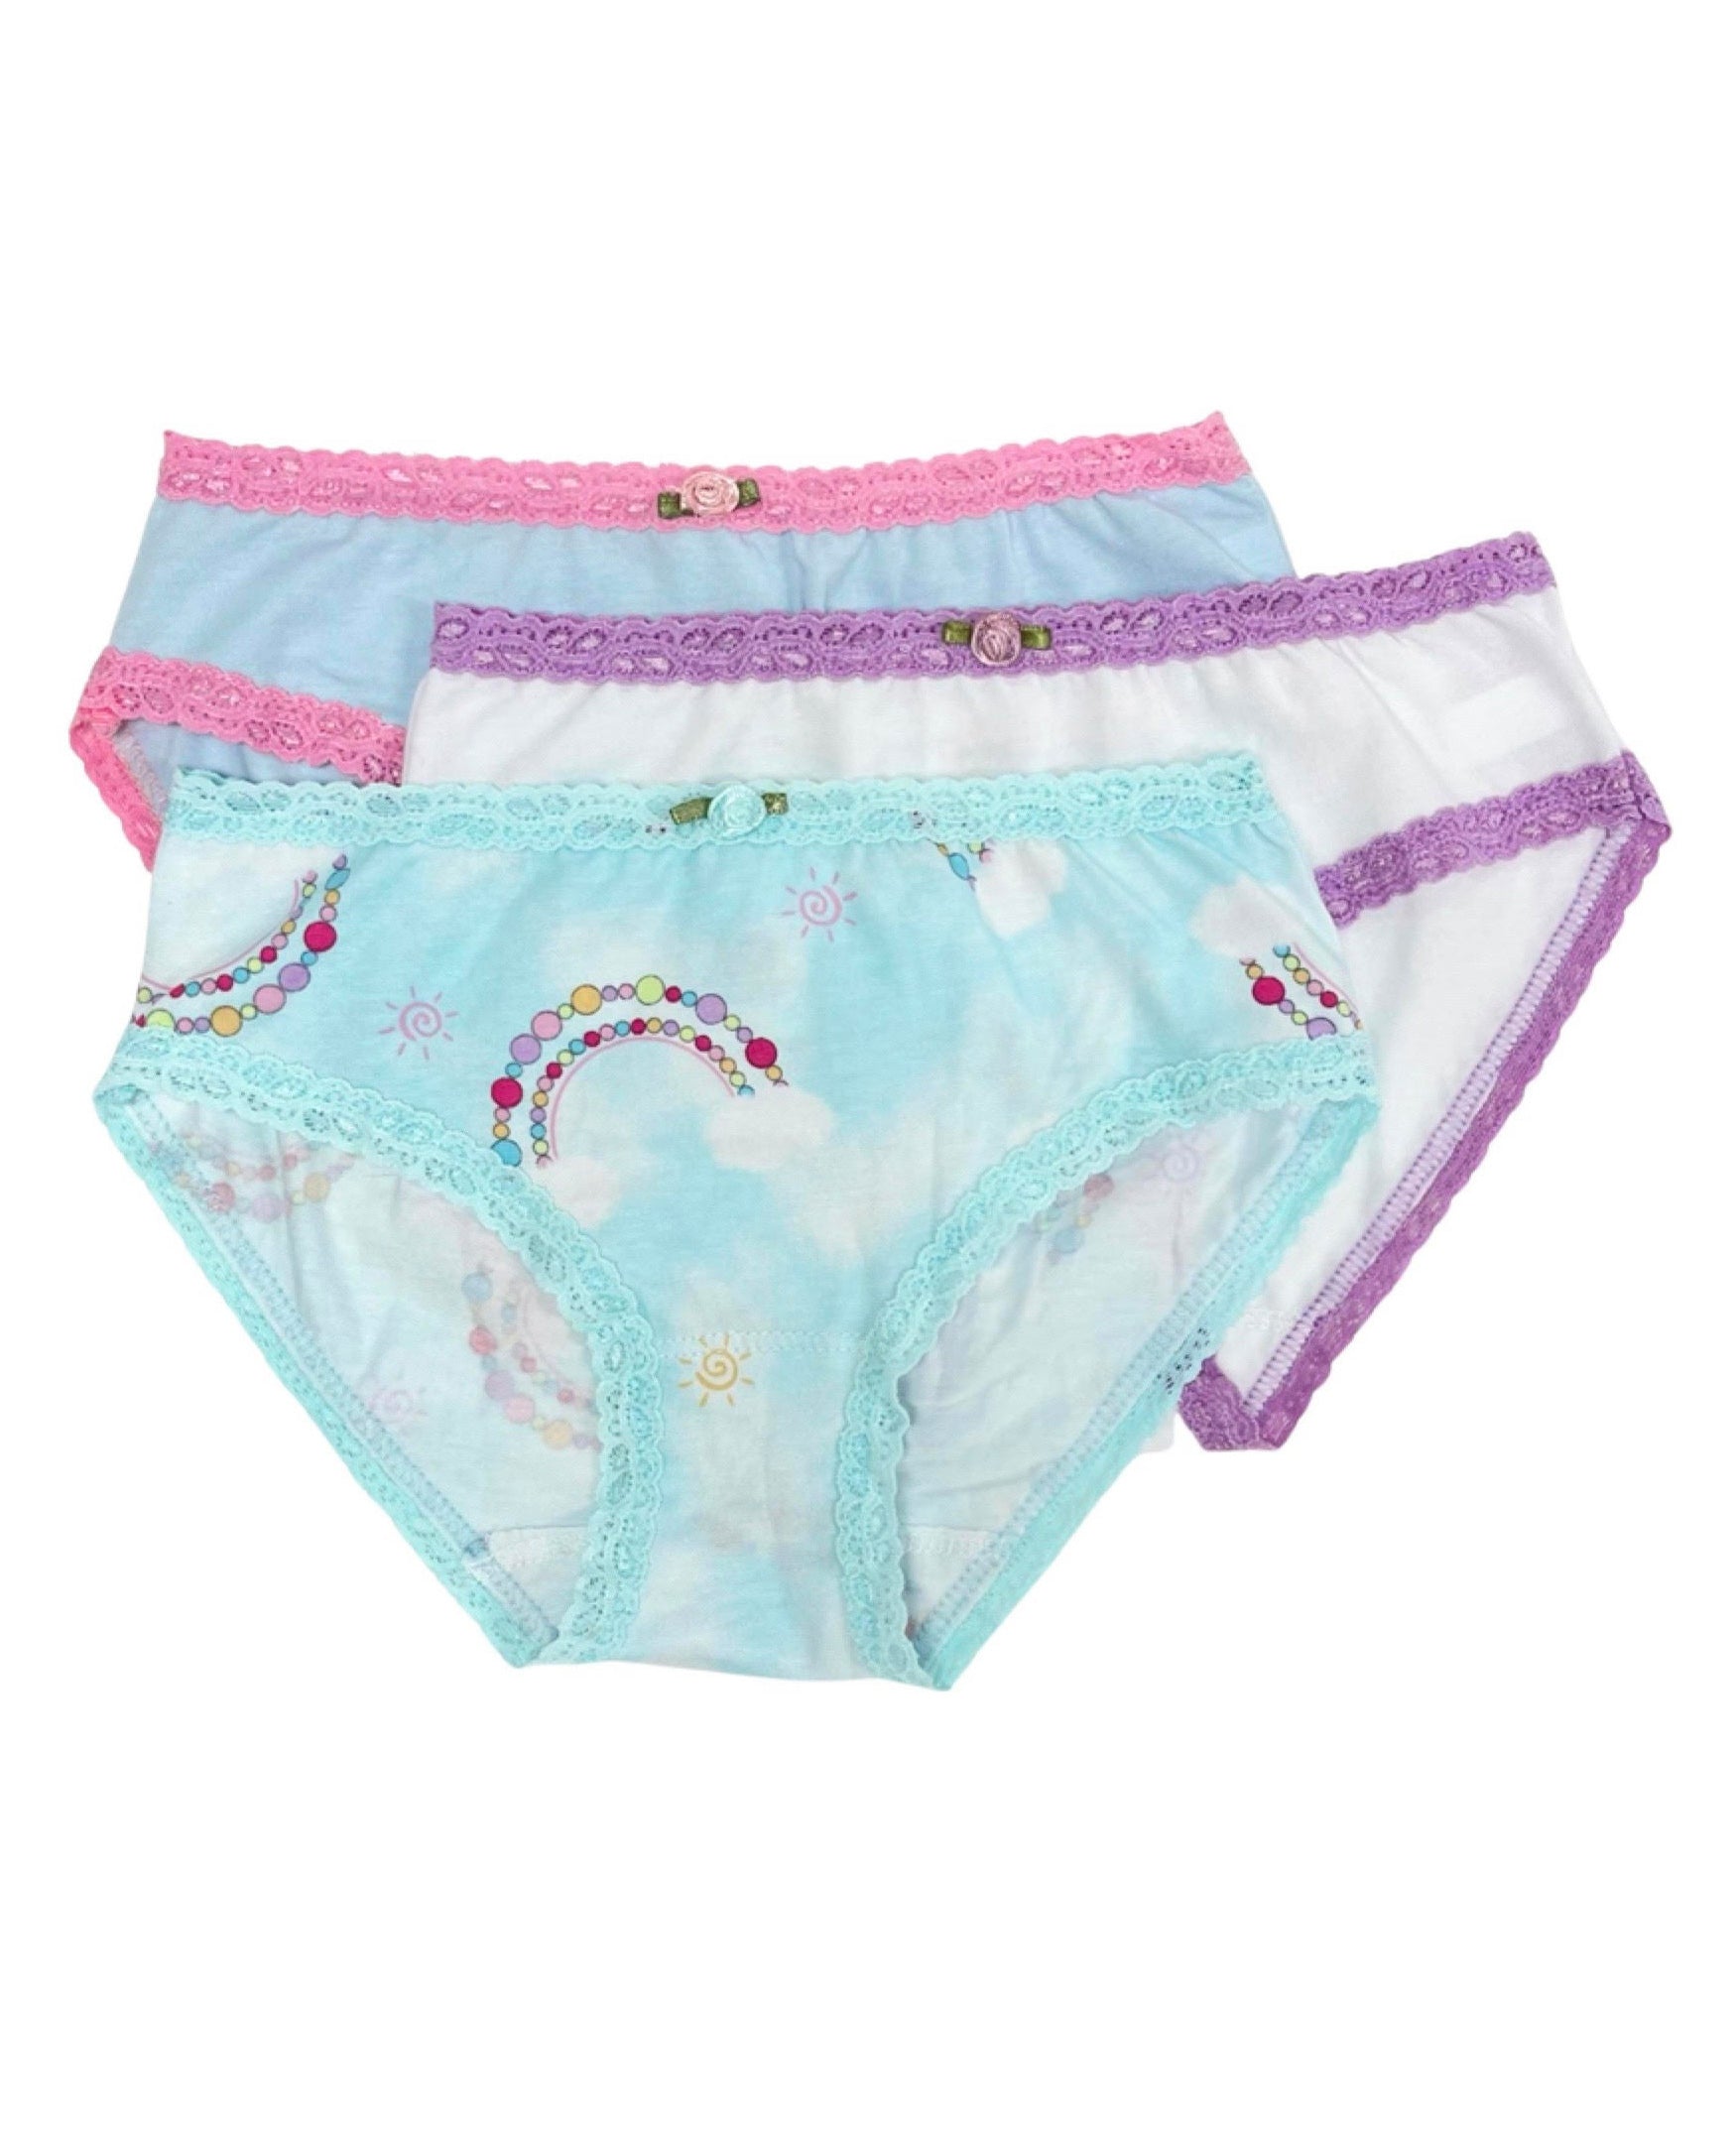  Esme JU60 Junior Teen Panty Underwear Size Junior Small 16 7Day  Rainbow (7PCs): Clothing, Shoes & Jewelry